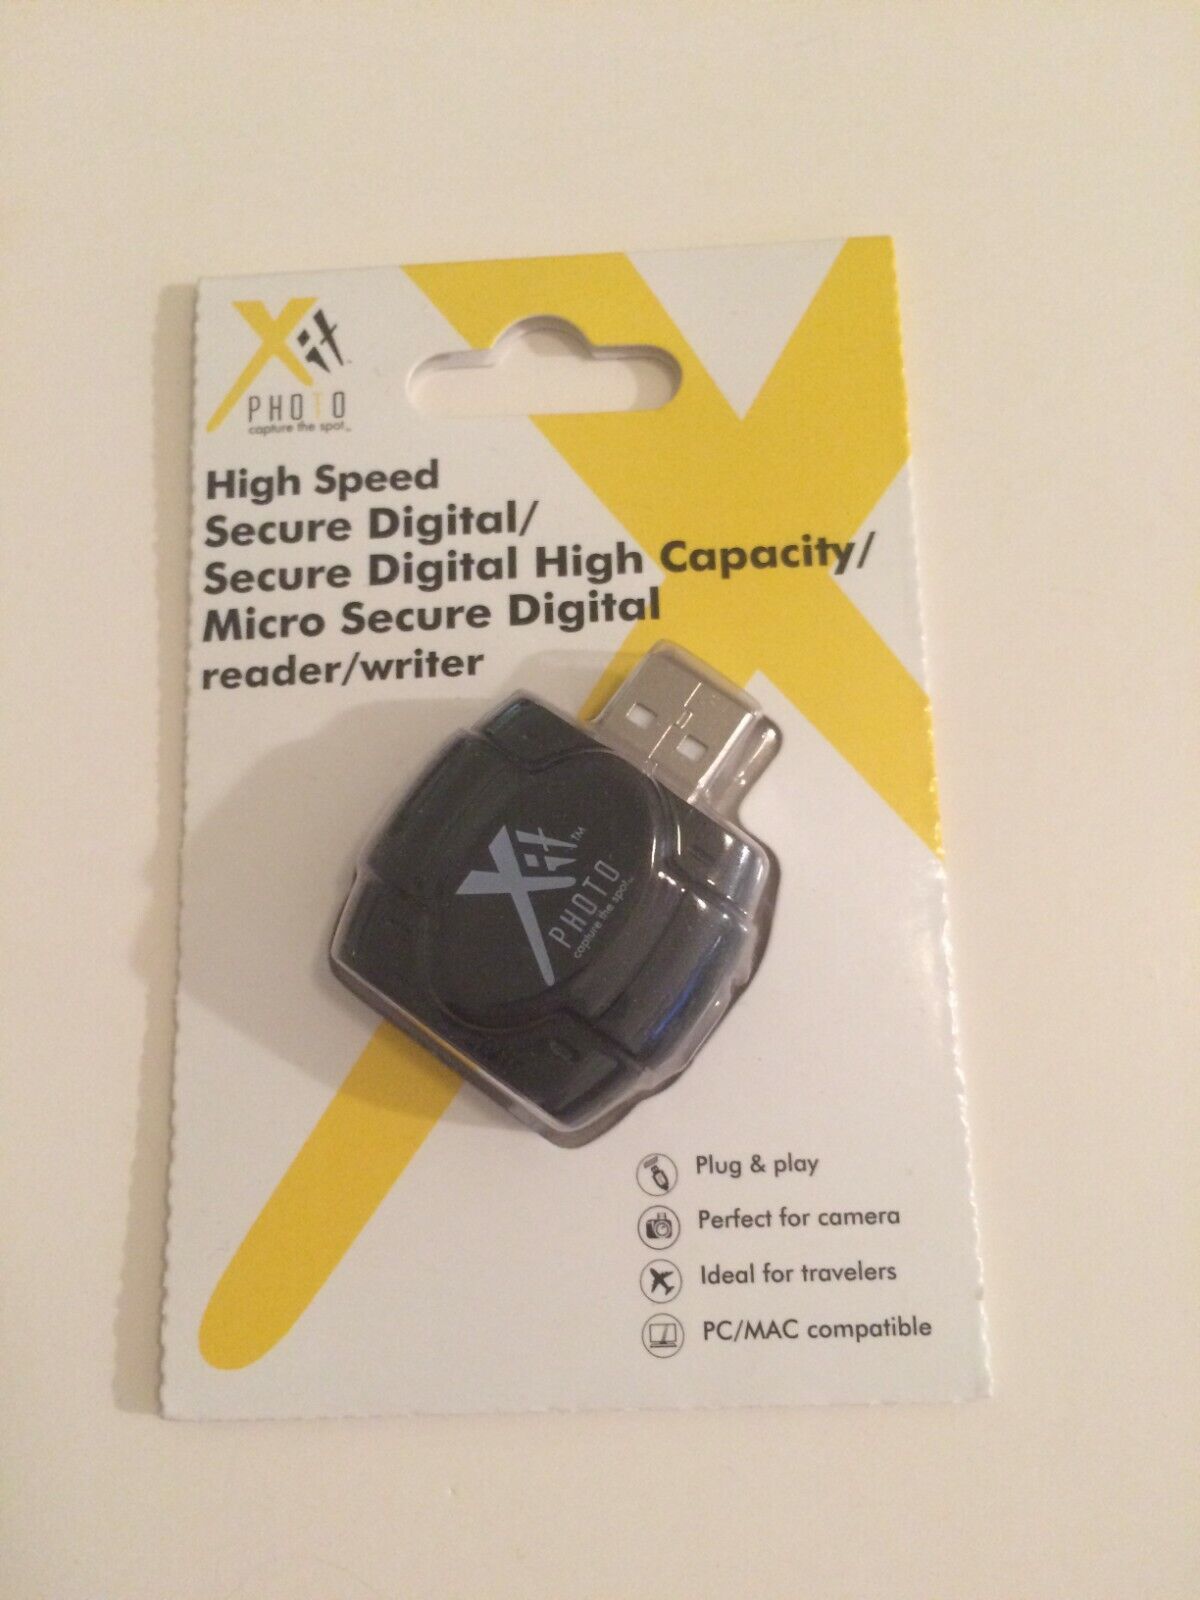 Xit Photo High Speed Micro Secure Digital Reader/Writer